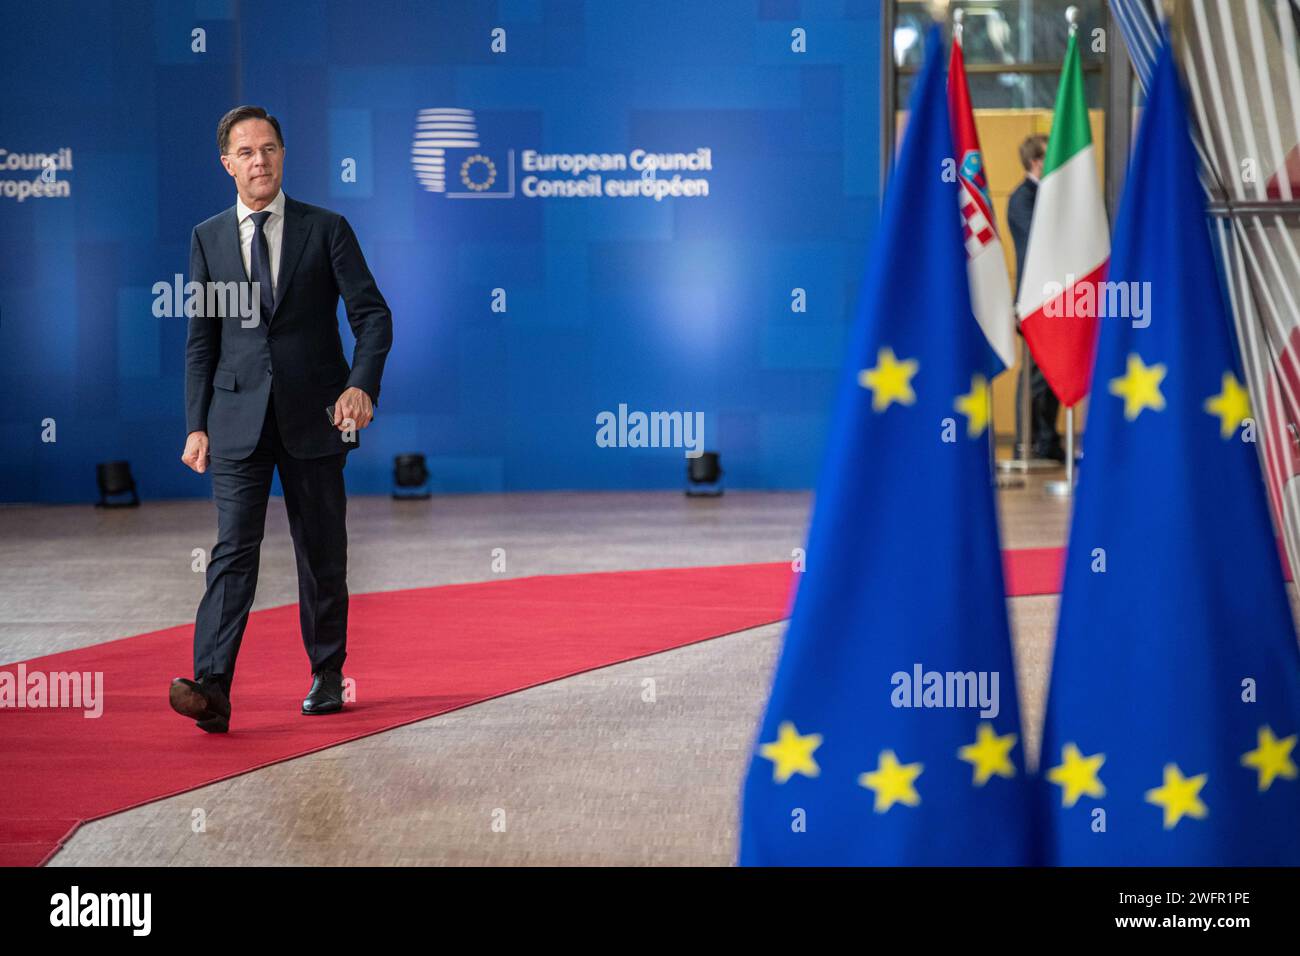 BRUSSELS - Outgoing Prime Minister Mark Rutte arrives for a new EU summit on the new budget. Discussions include billions in support for Ukraine, which the leaders did not agree on during the previous summit. ANP JONAS ROOSENS netherlands out - belgium out Stock Photo